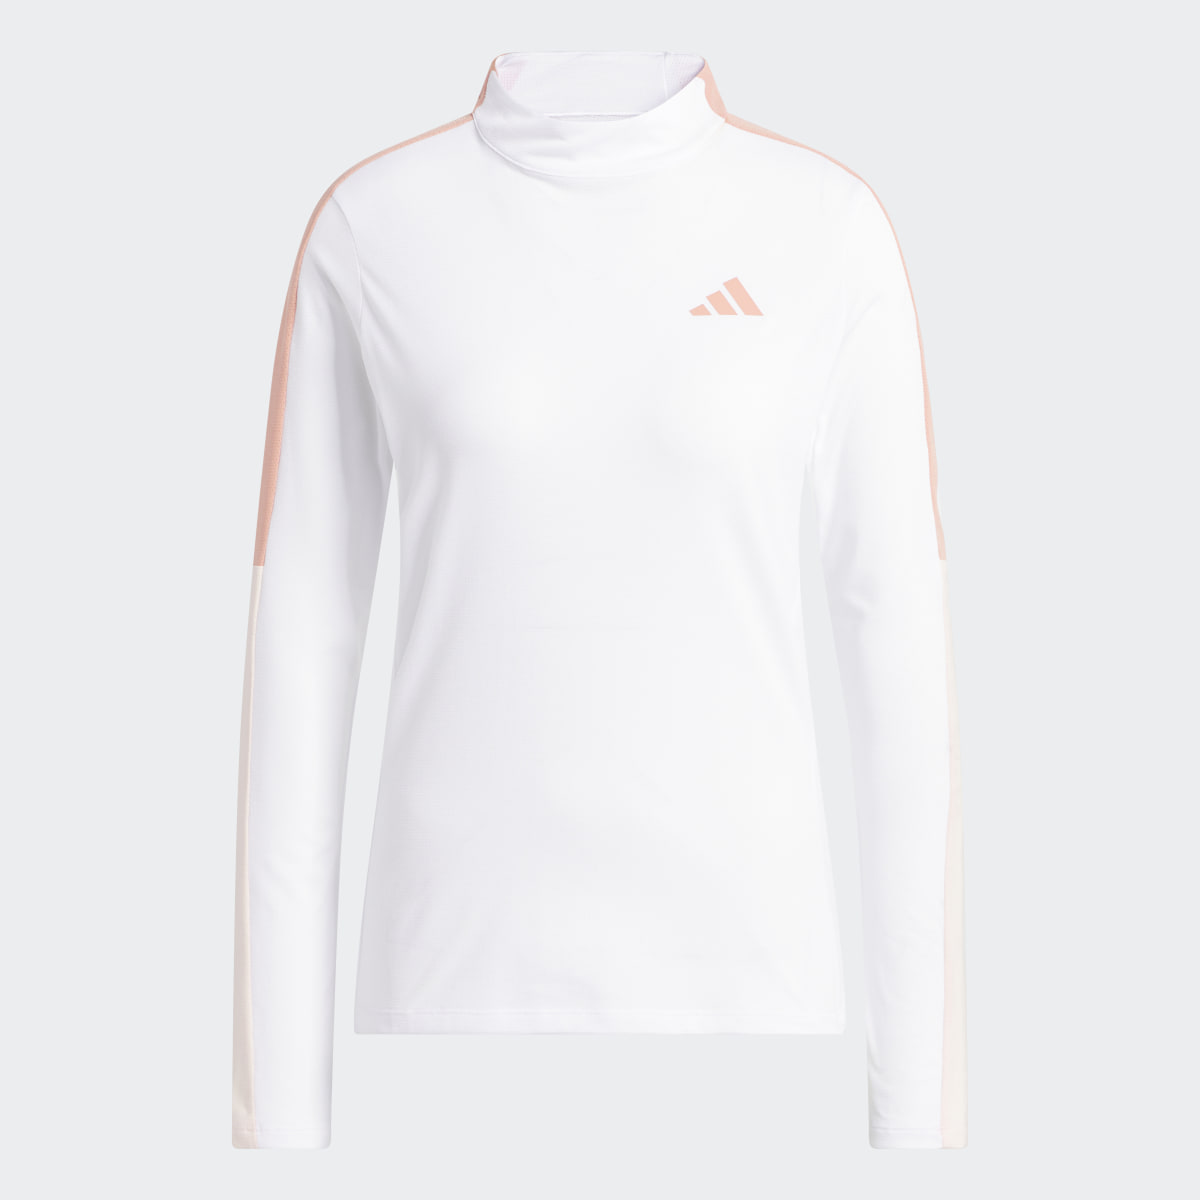 Adidas Made With Nature Mock Neck Long-Sleeve Top. 5